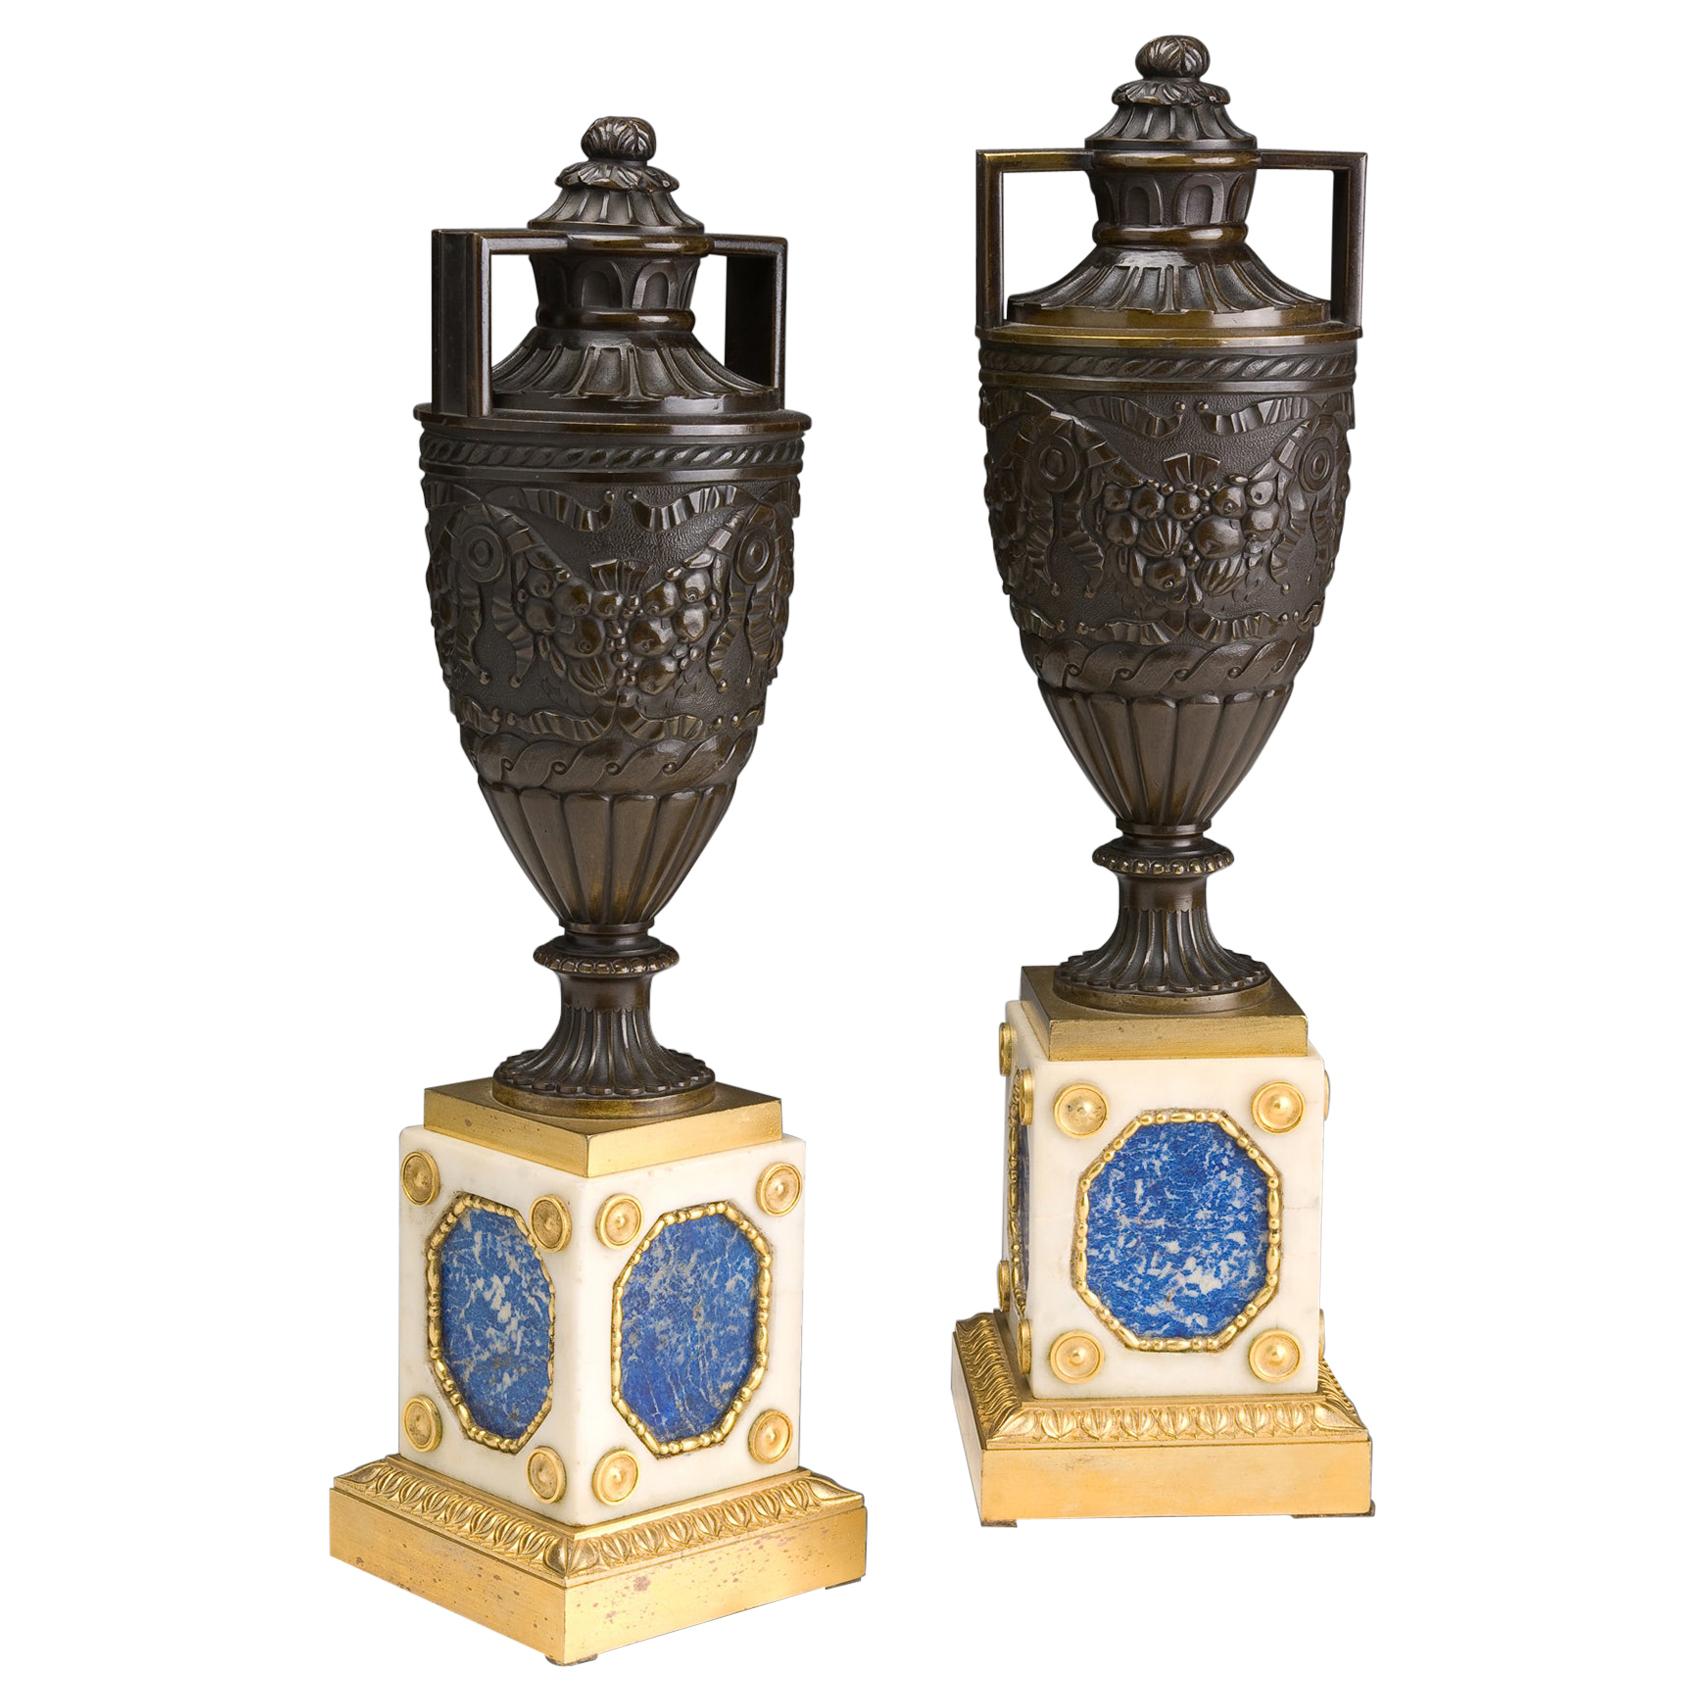 Pair of Patinated and Gilded Bronze Urns Baltics, Empire Period